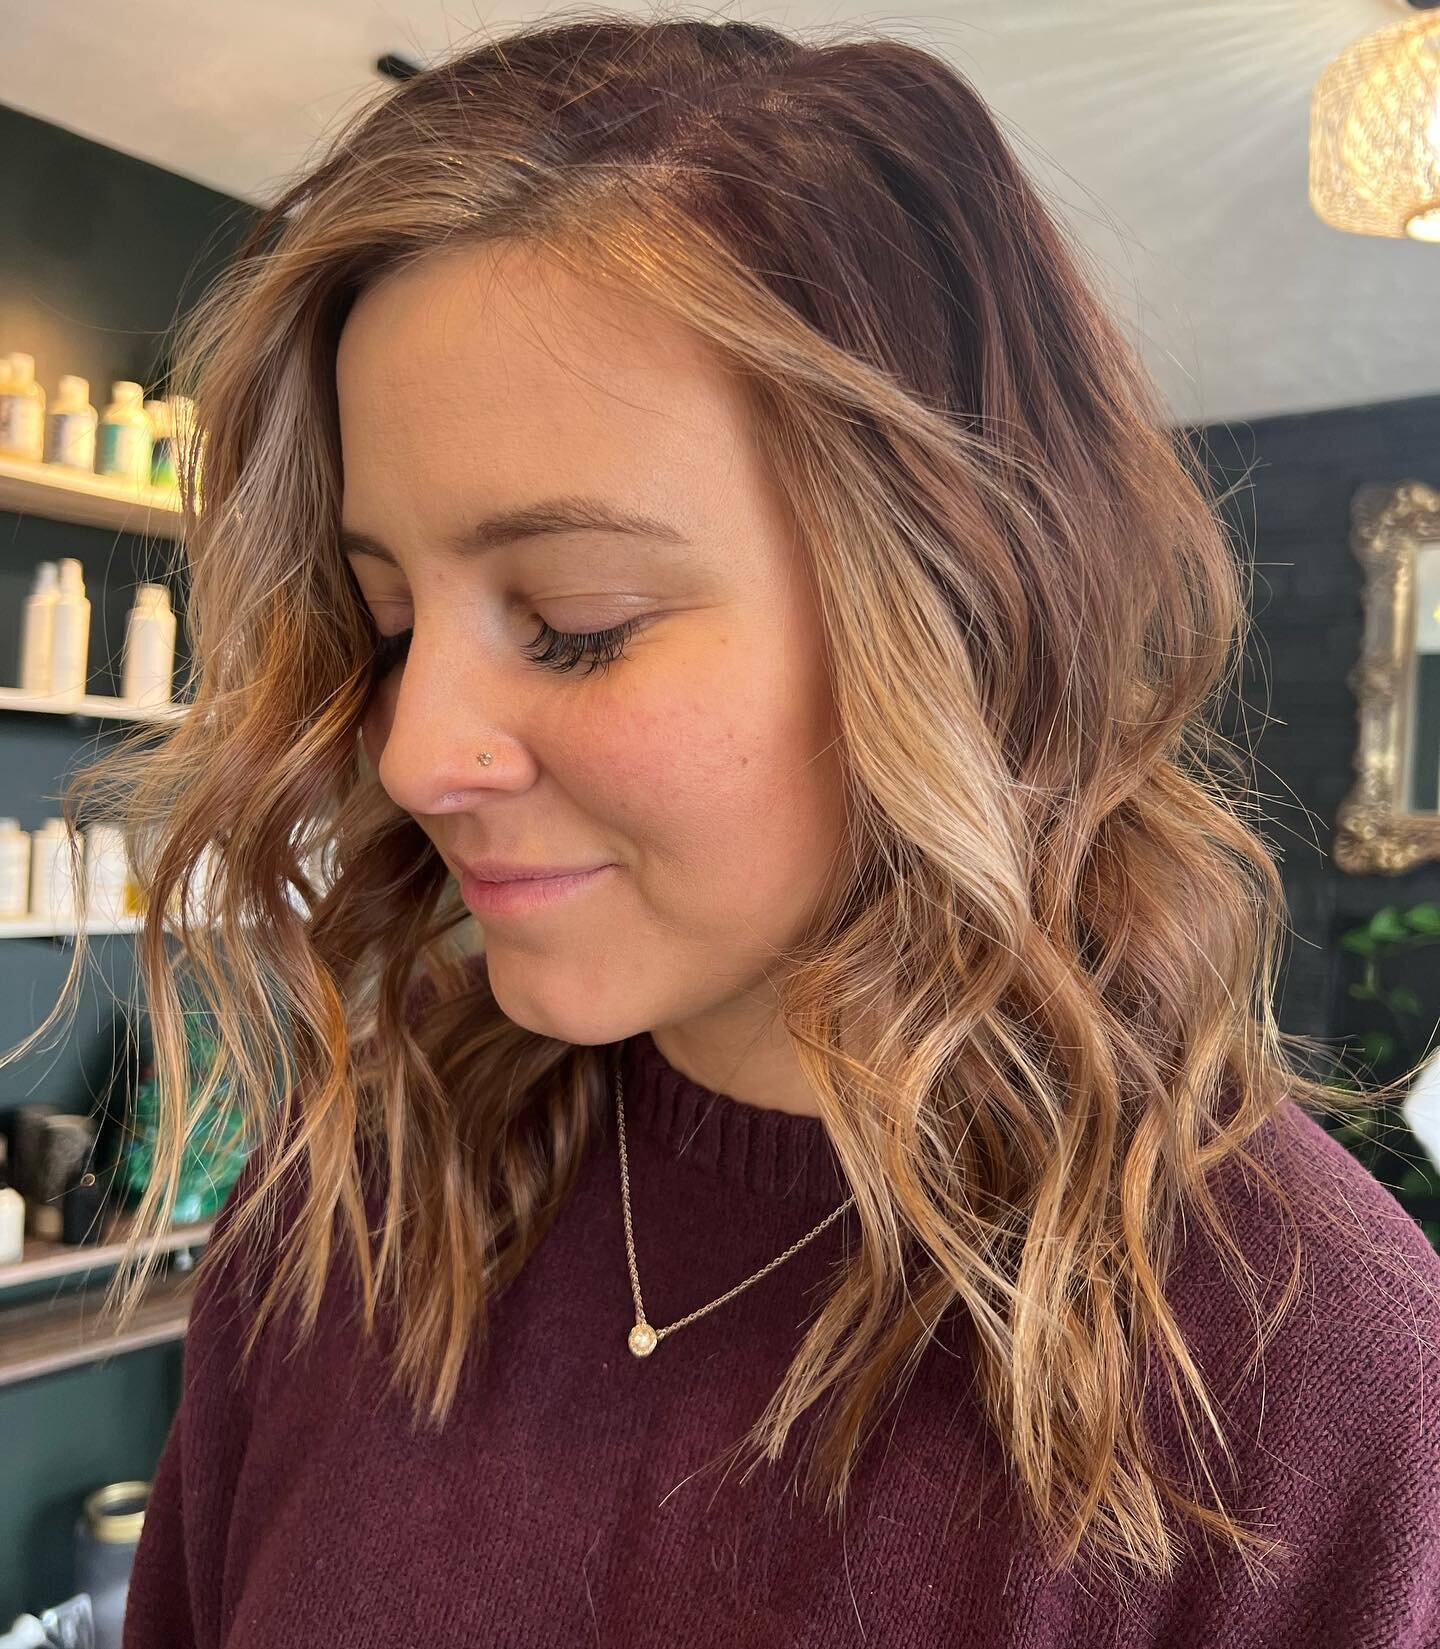 Is it snowing out ? Hadn&rsquo;t heard. 🤷🏻&zwj;♀️

Touched up her base with a rich warm chocolate shade, brightened up that money piece + custom gloss got this babe all freshened up for a big upcoming birthday 🥳 

#colormelt #faceframehighlights #